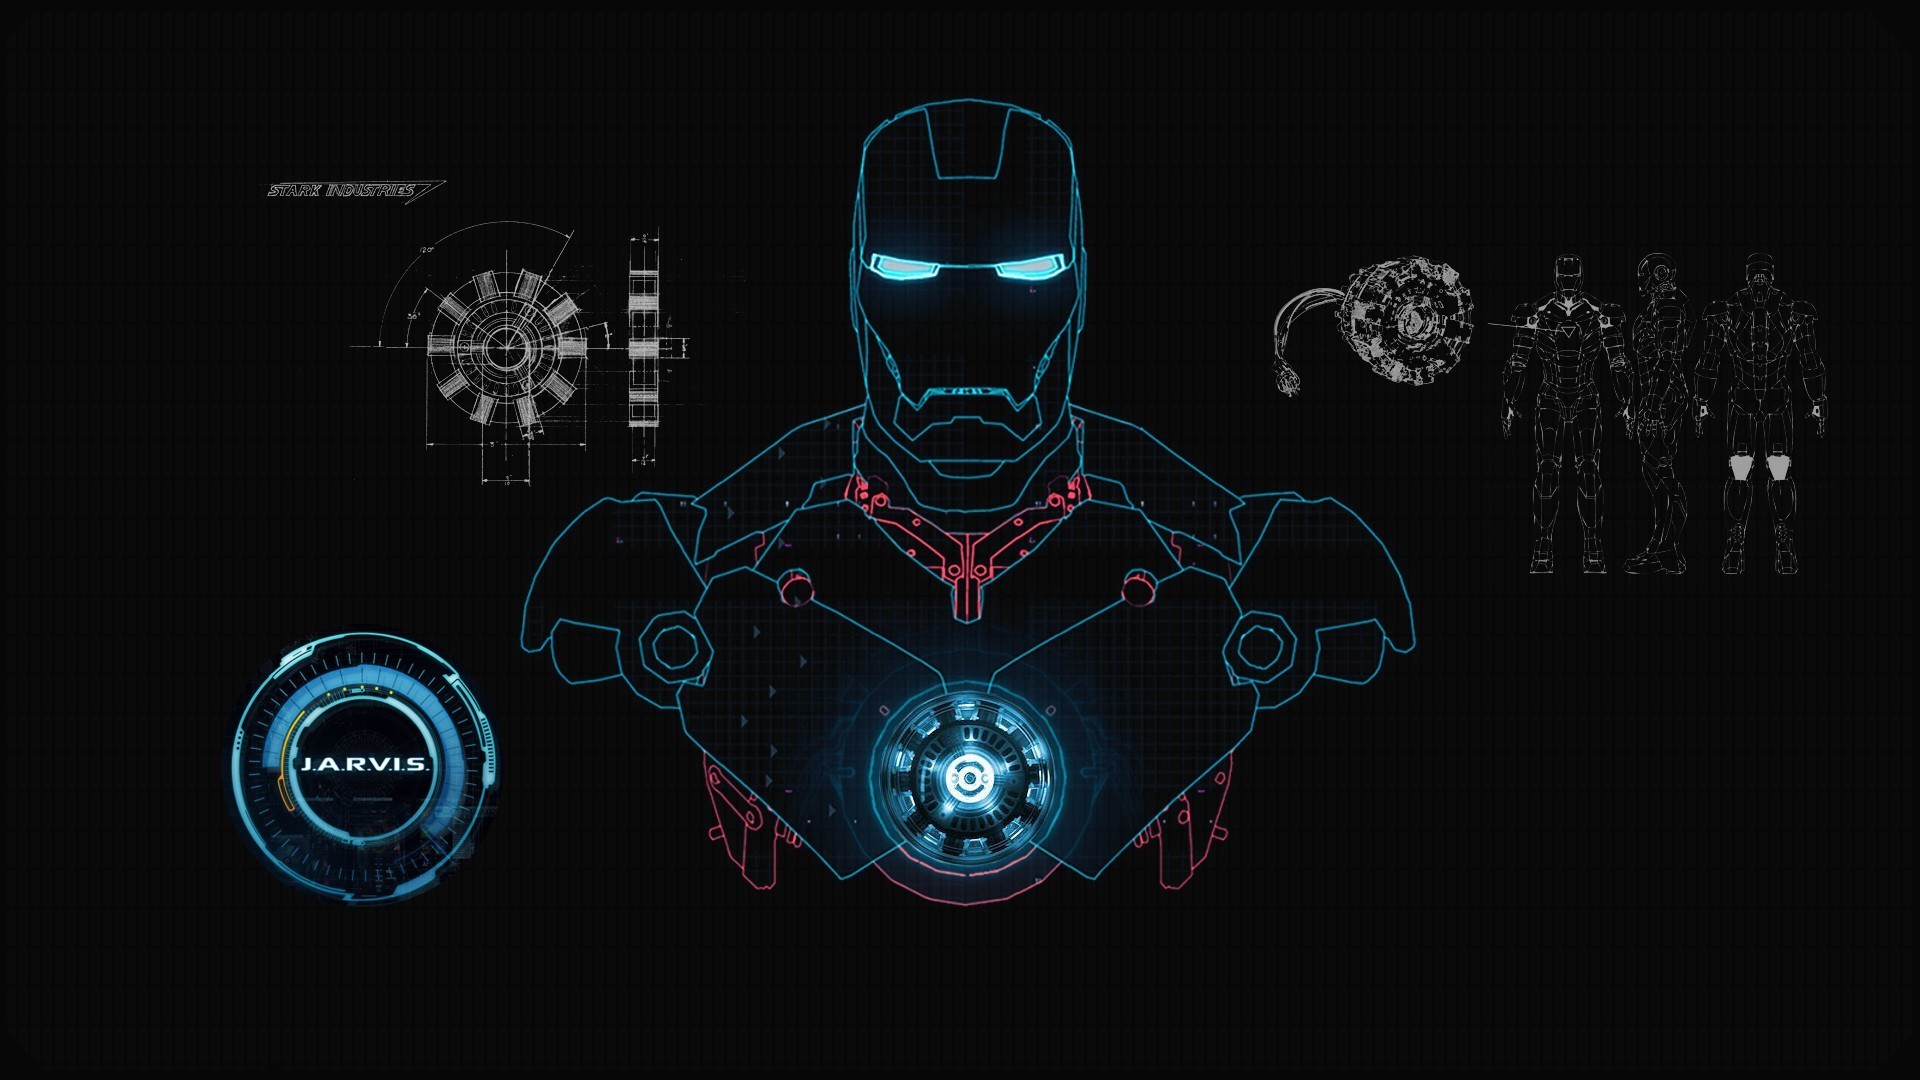 18430 download wallpaper iron man, cinema, black screensavers and pictures for free